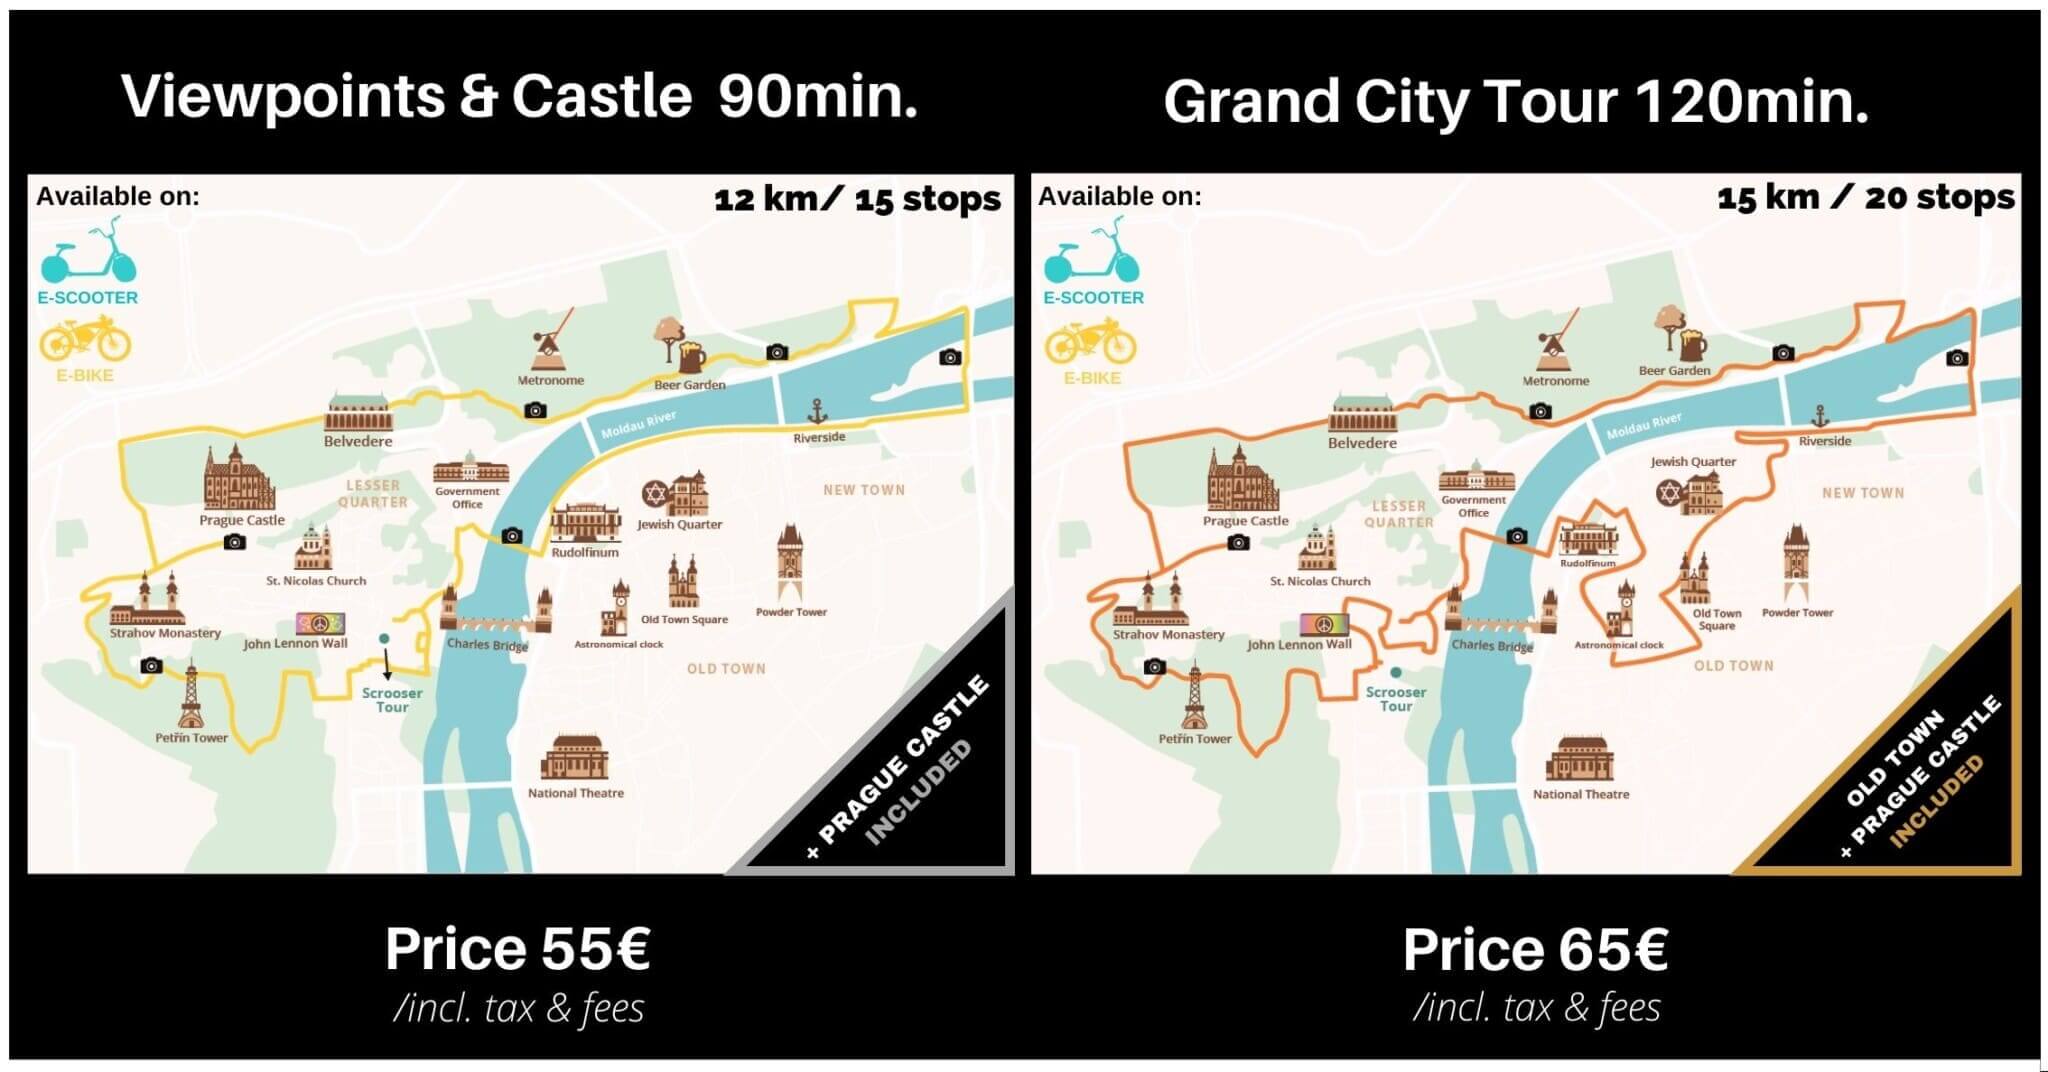 grand city tour vs viewpoints tour - Ebike or escooter